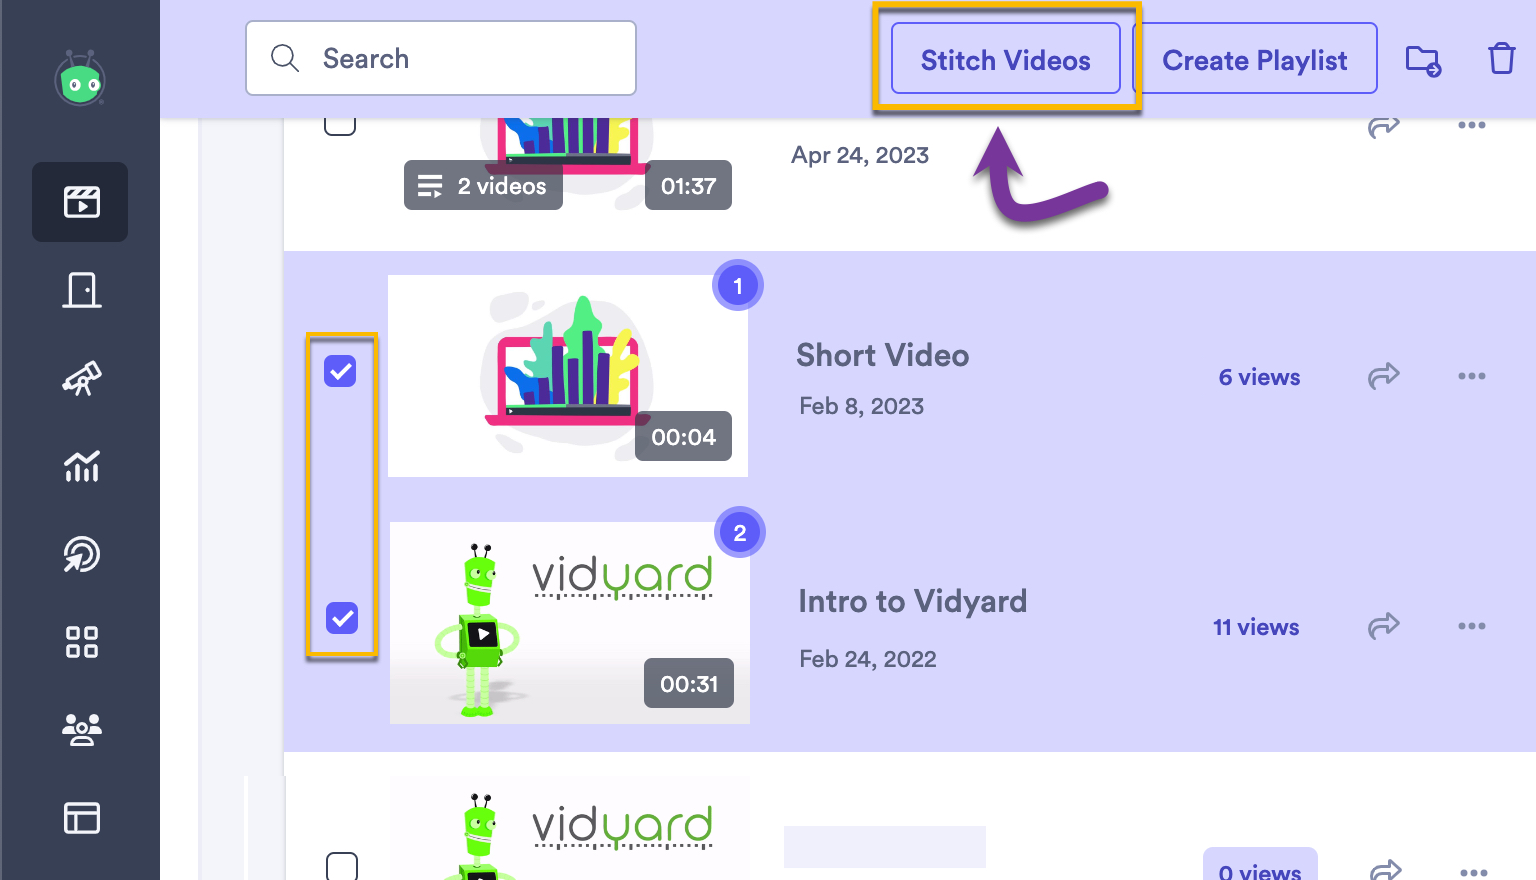 Choosing videos from your library to stitch together